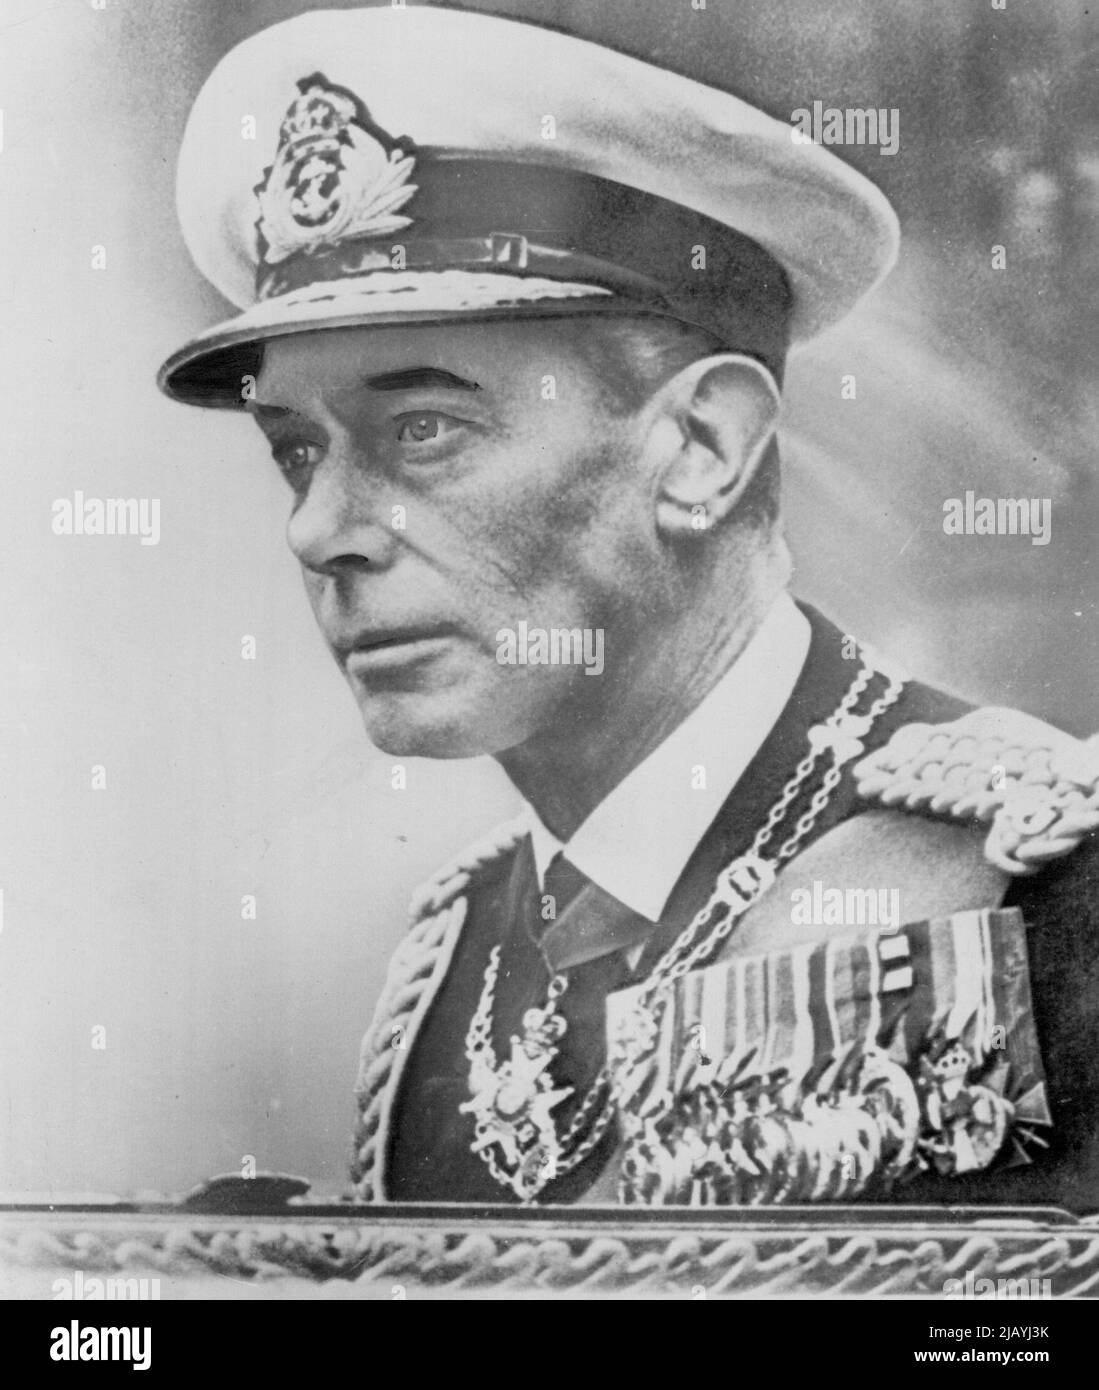 King George VI Dies -- King George V1 (above) died peacefully in his sleep today at his country residence at Sandringhan. He was 56. His 25-year-old daughter, Elizabeth, immediately became Britain's Queen. February 06, 1951. (Photo by AP Wirephoto). Stock Photo